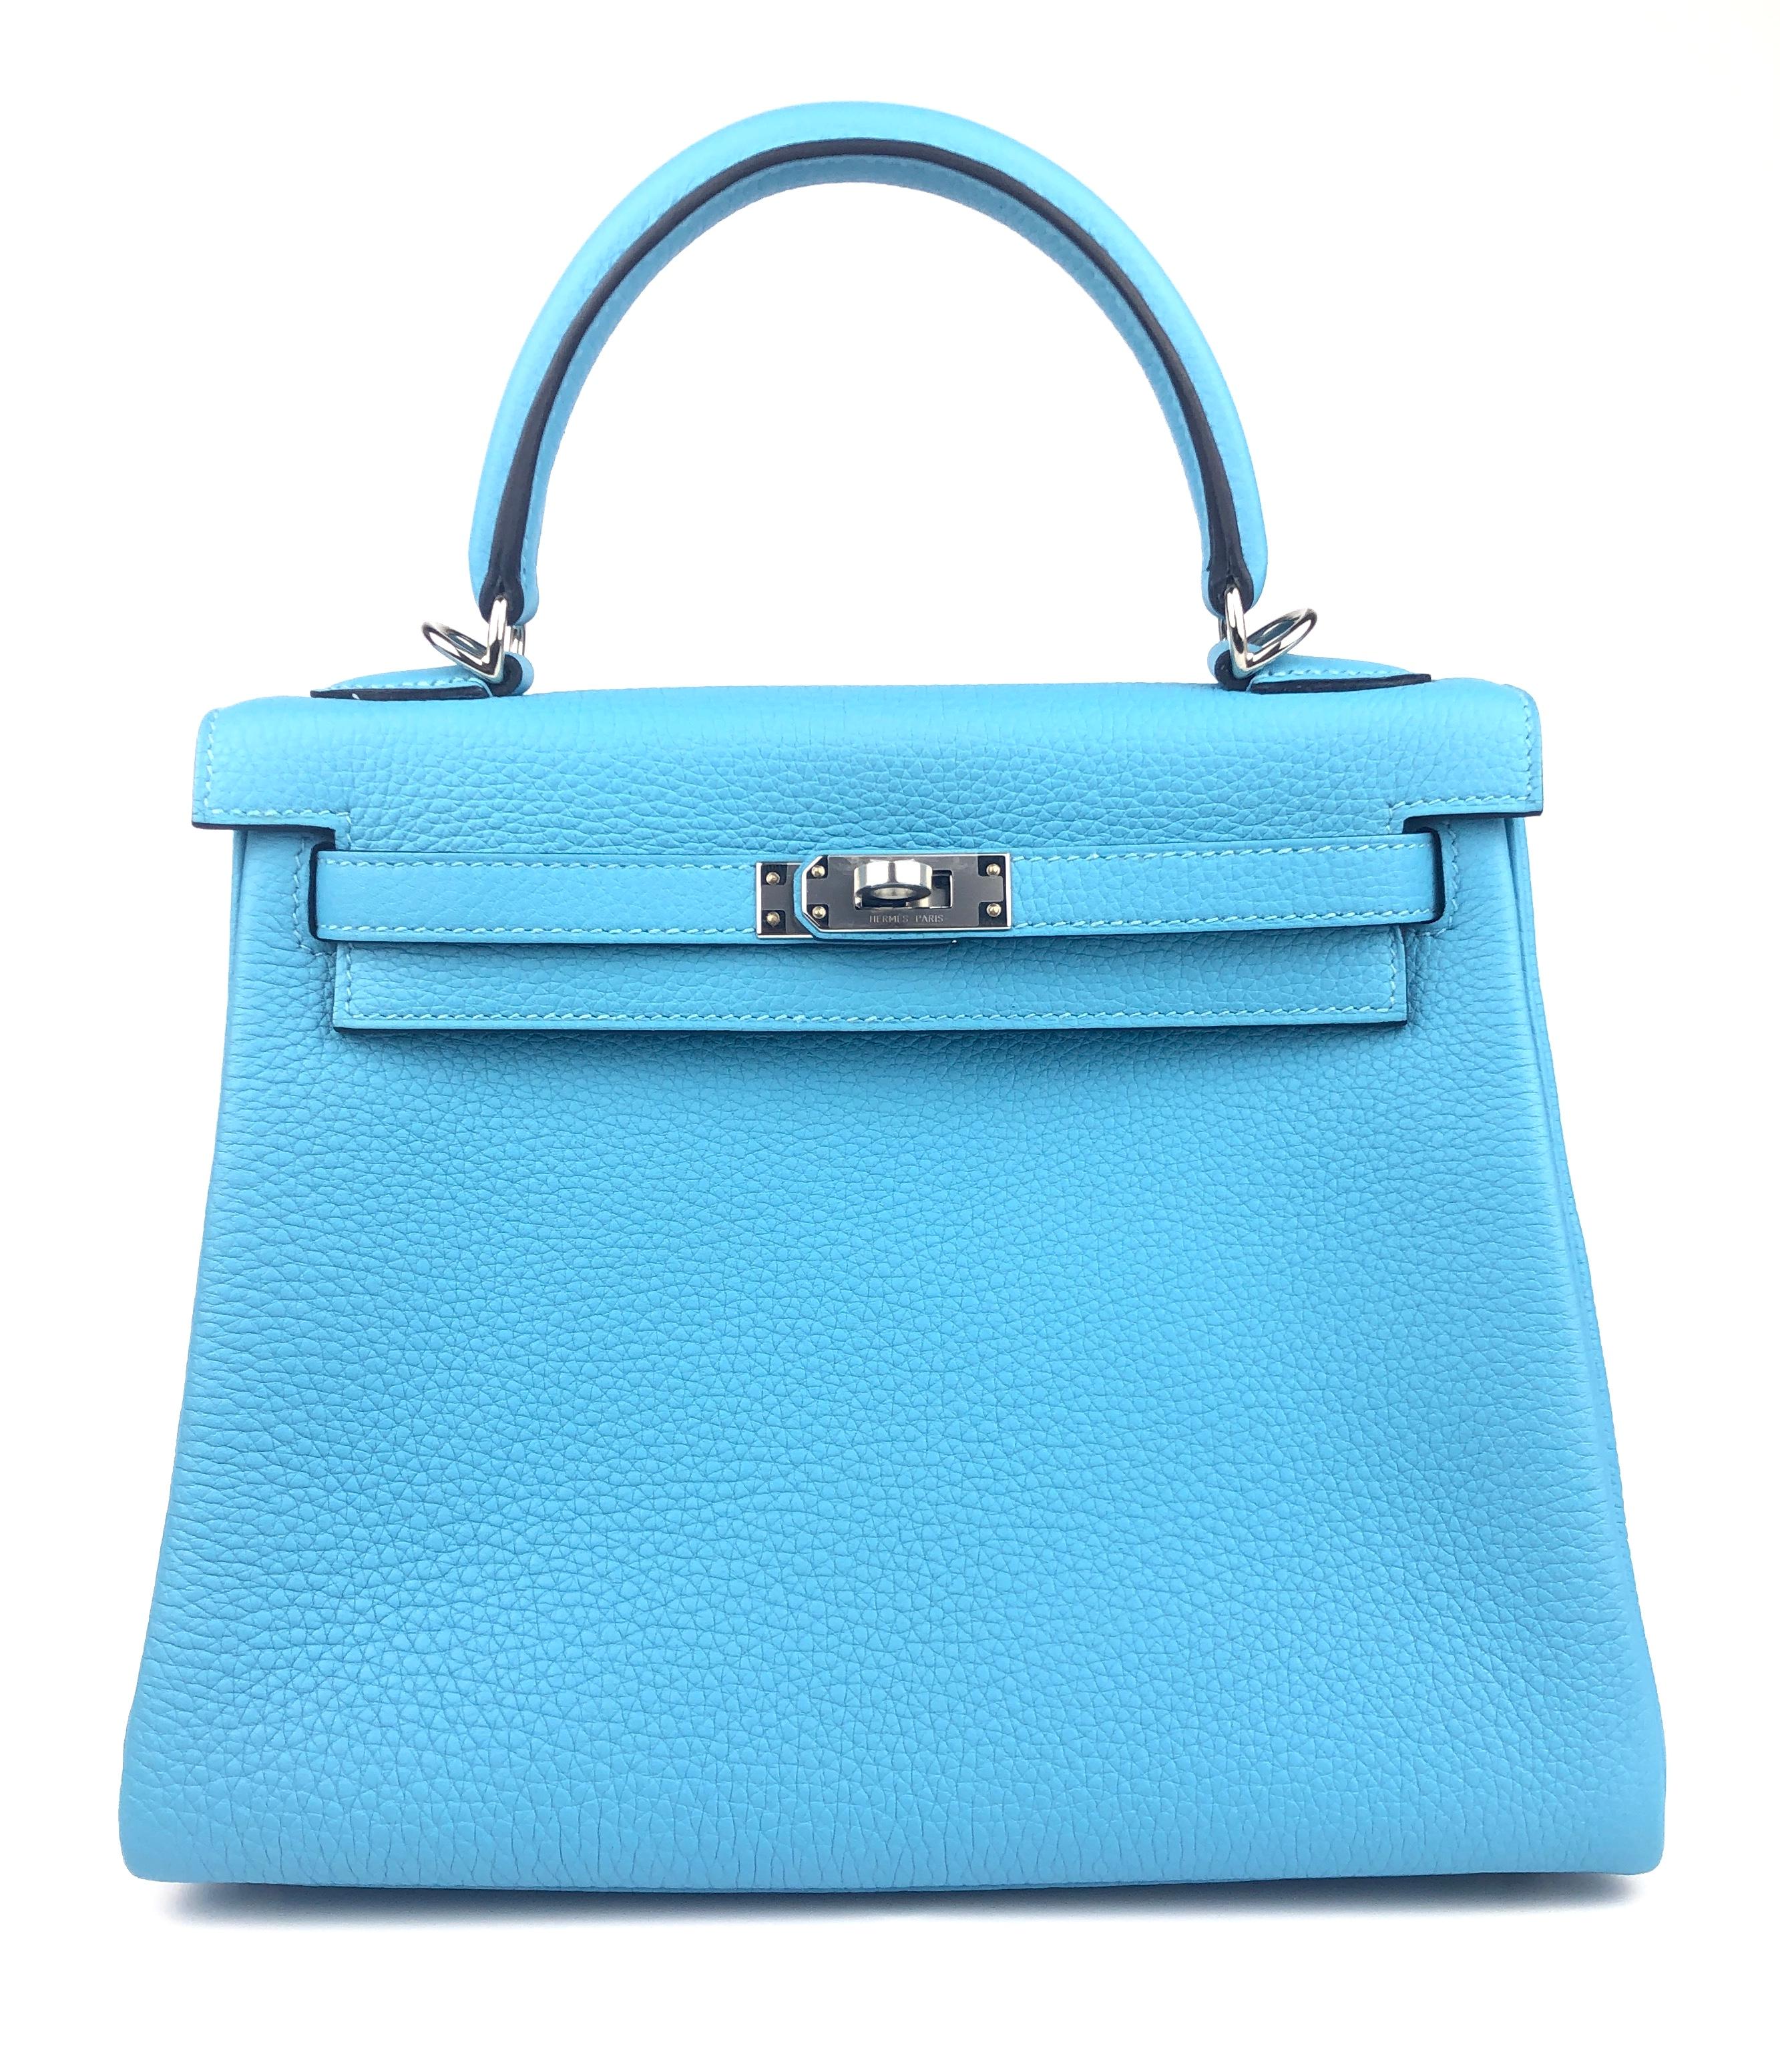 Stunning Like New Hermes Kelly 25 Bleu du Nord Togo Leather Palladium Hardware. Y Stamp 2020. 

Shop with Confidence from Lux Addicts. Authenticity Guaranteed! 